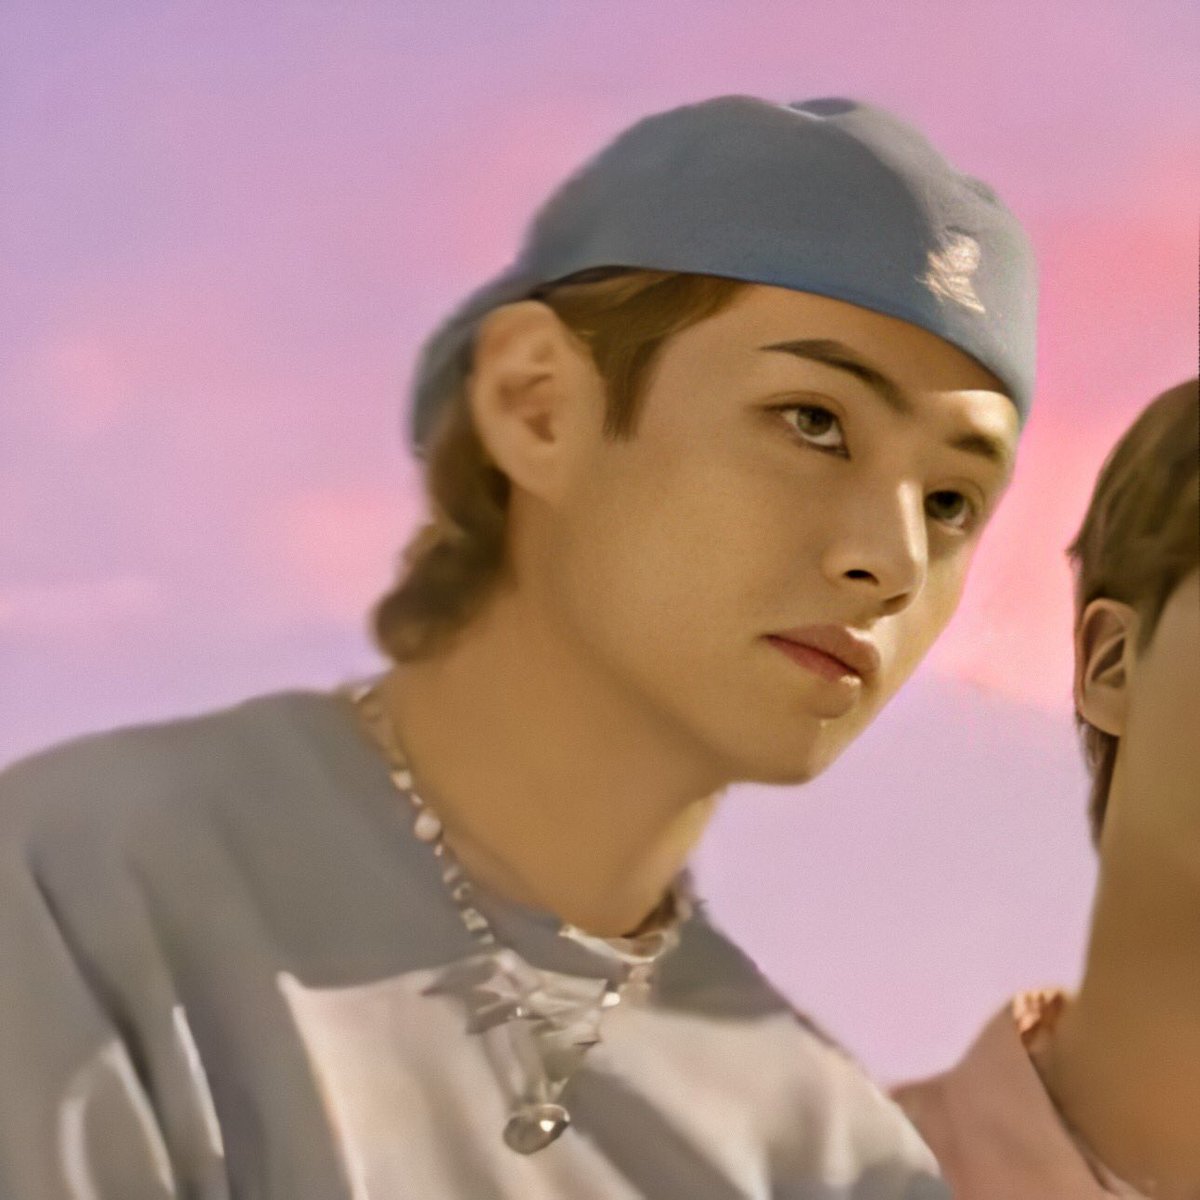 Bts V News In Case You Needed Newtro Fashion Taehyung In A Fitted Cap Worn Backwards To Help You Through The Day Here He Is In What I Hope Looks